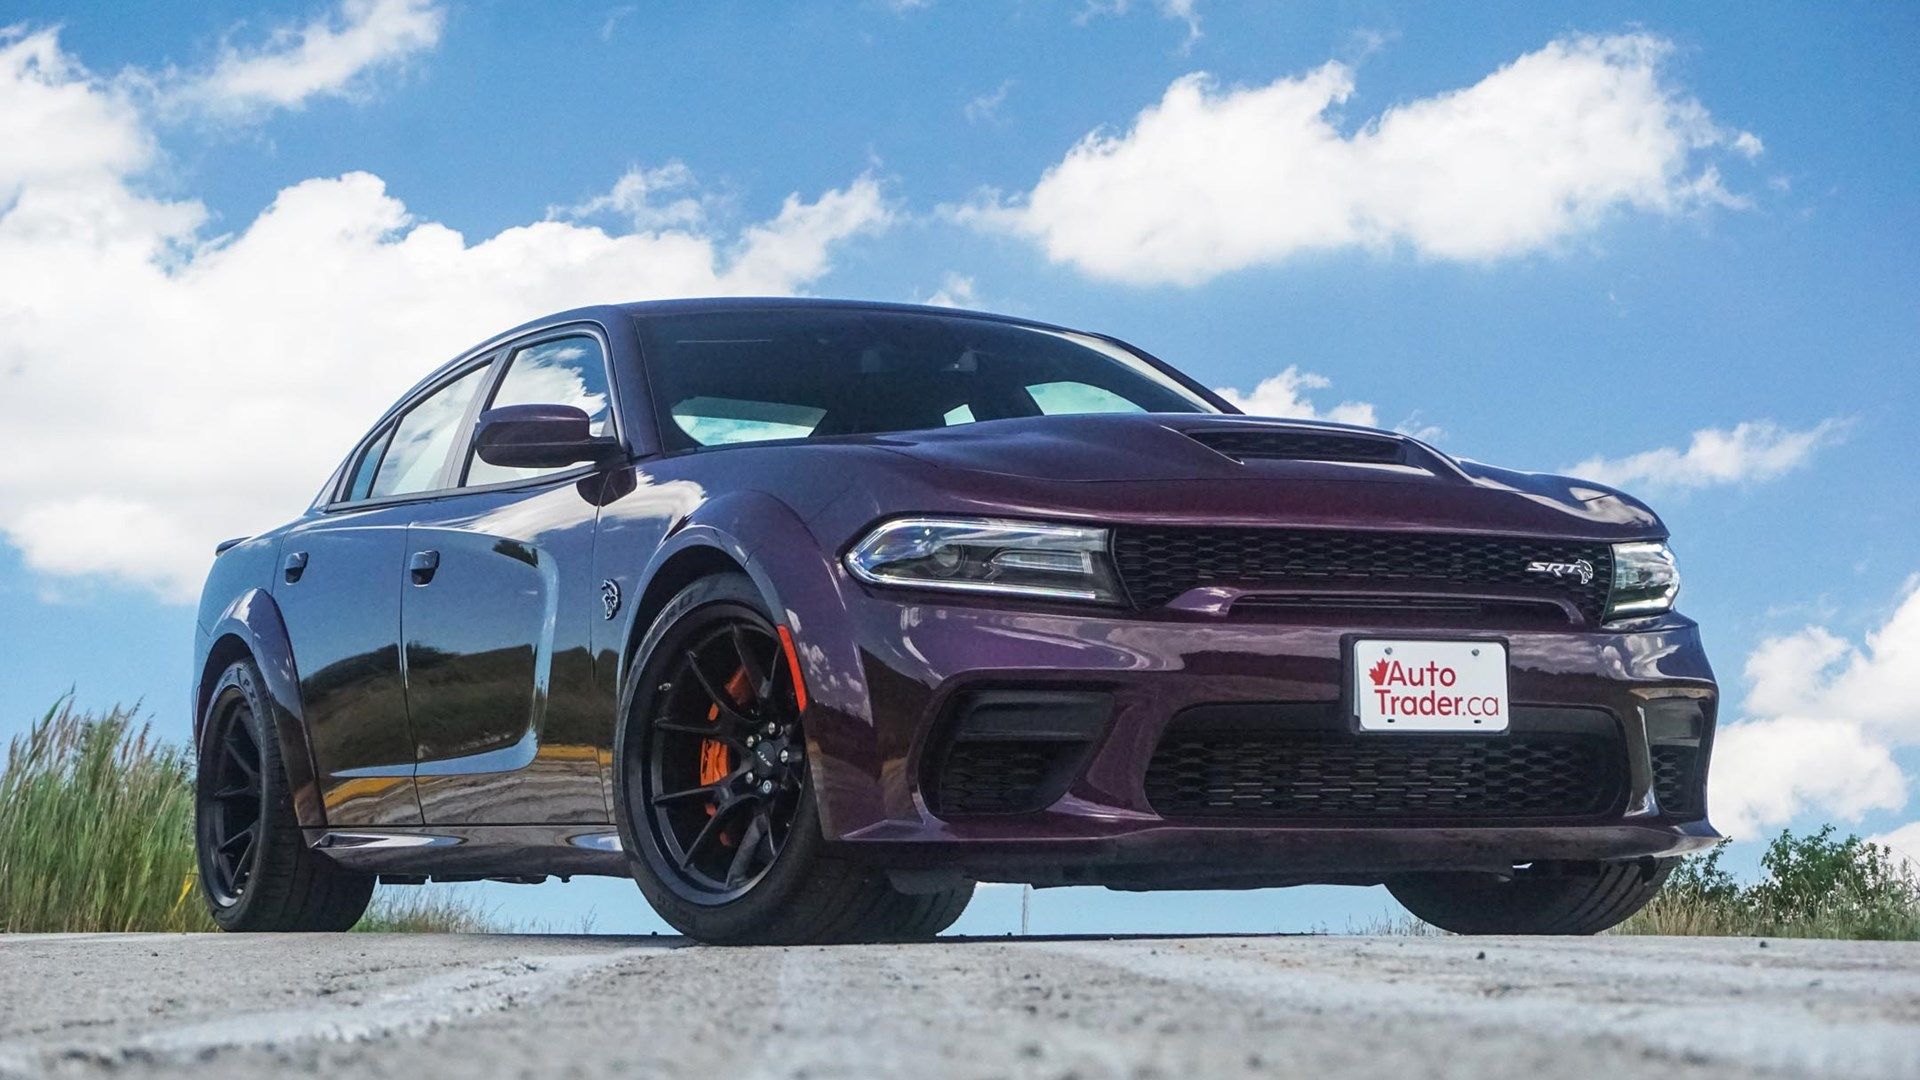 9 Reasons Why We Love The 2022 Dodge Charger SRT Hellcat Redeye Widebody